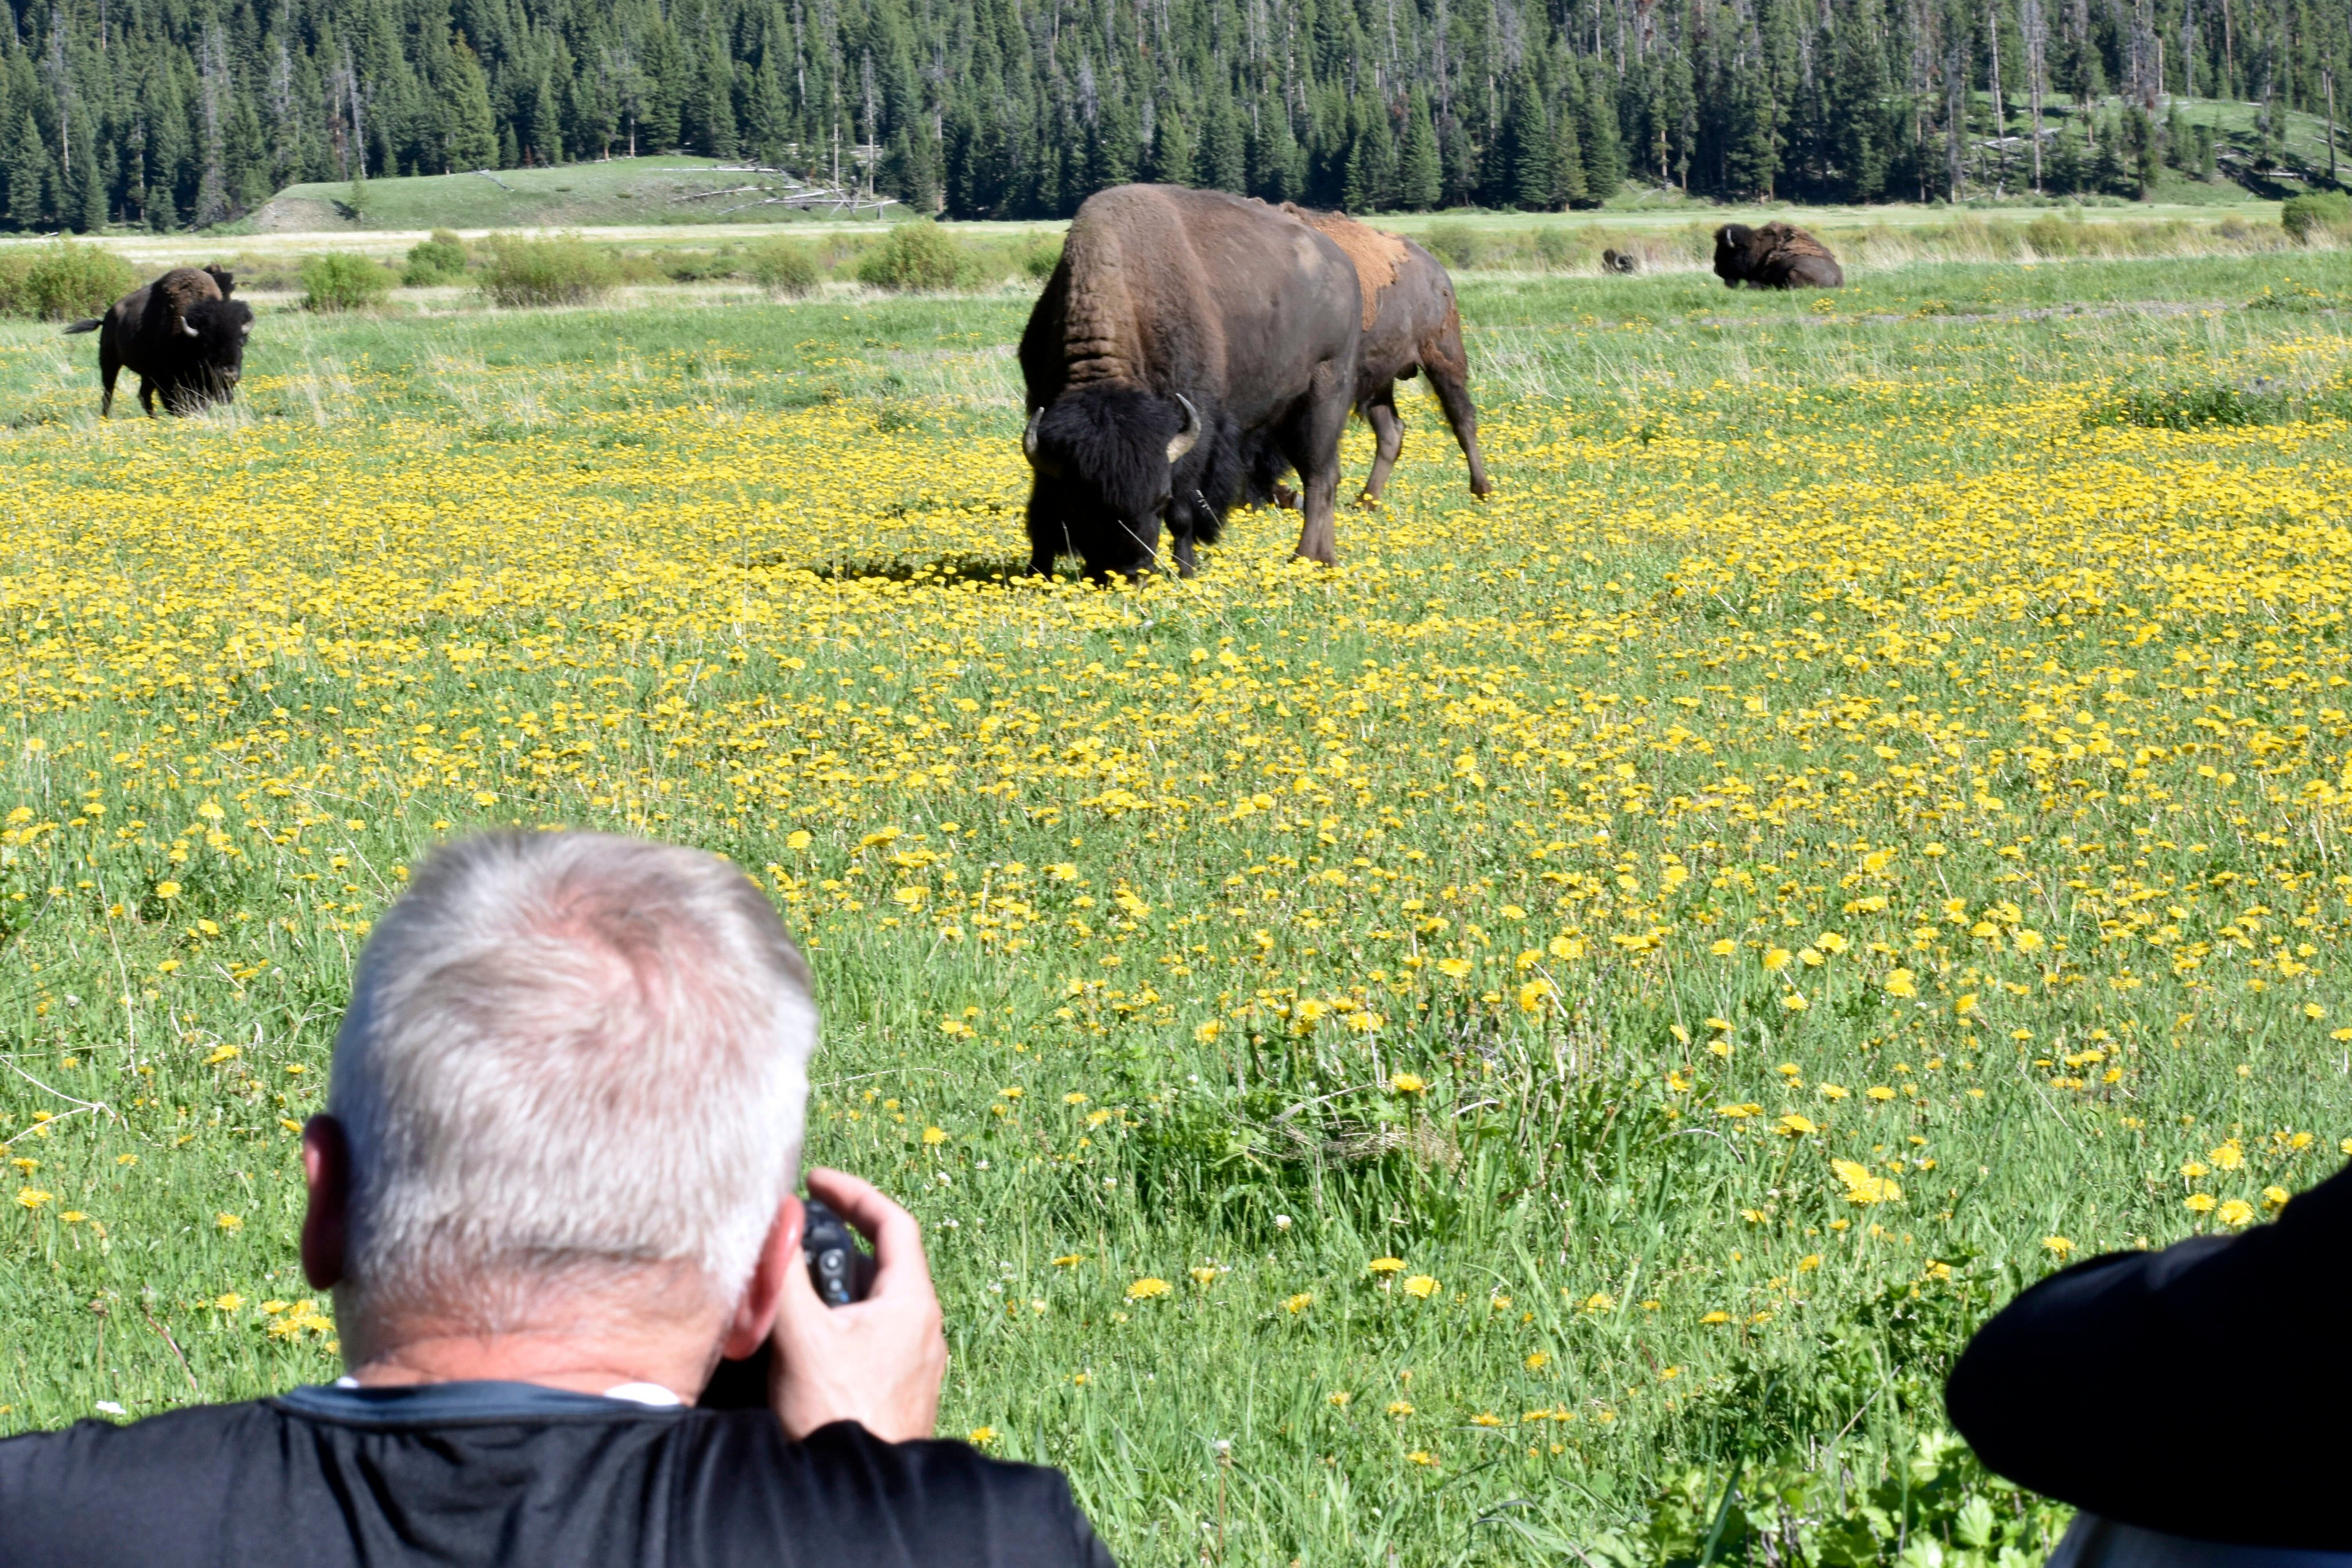 A rare sighting of a white buffalo calf in Yellowstone’s Lamar Valley has inspired visitors to try to catch a glimpse of the animal. Photo: AP